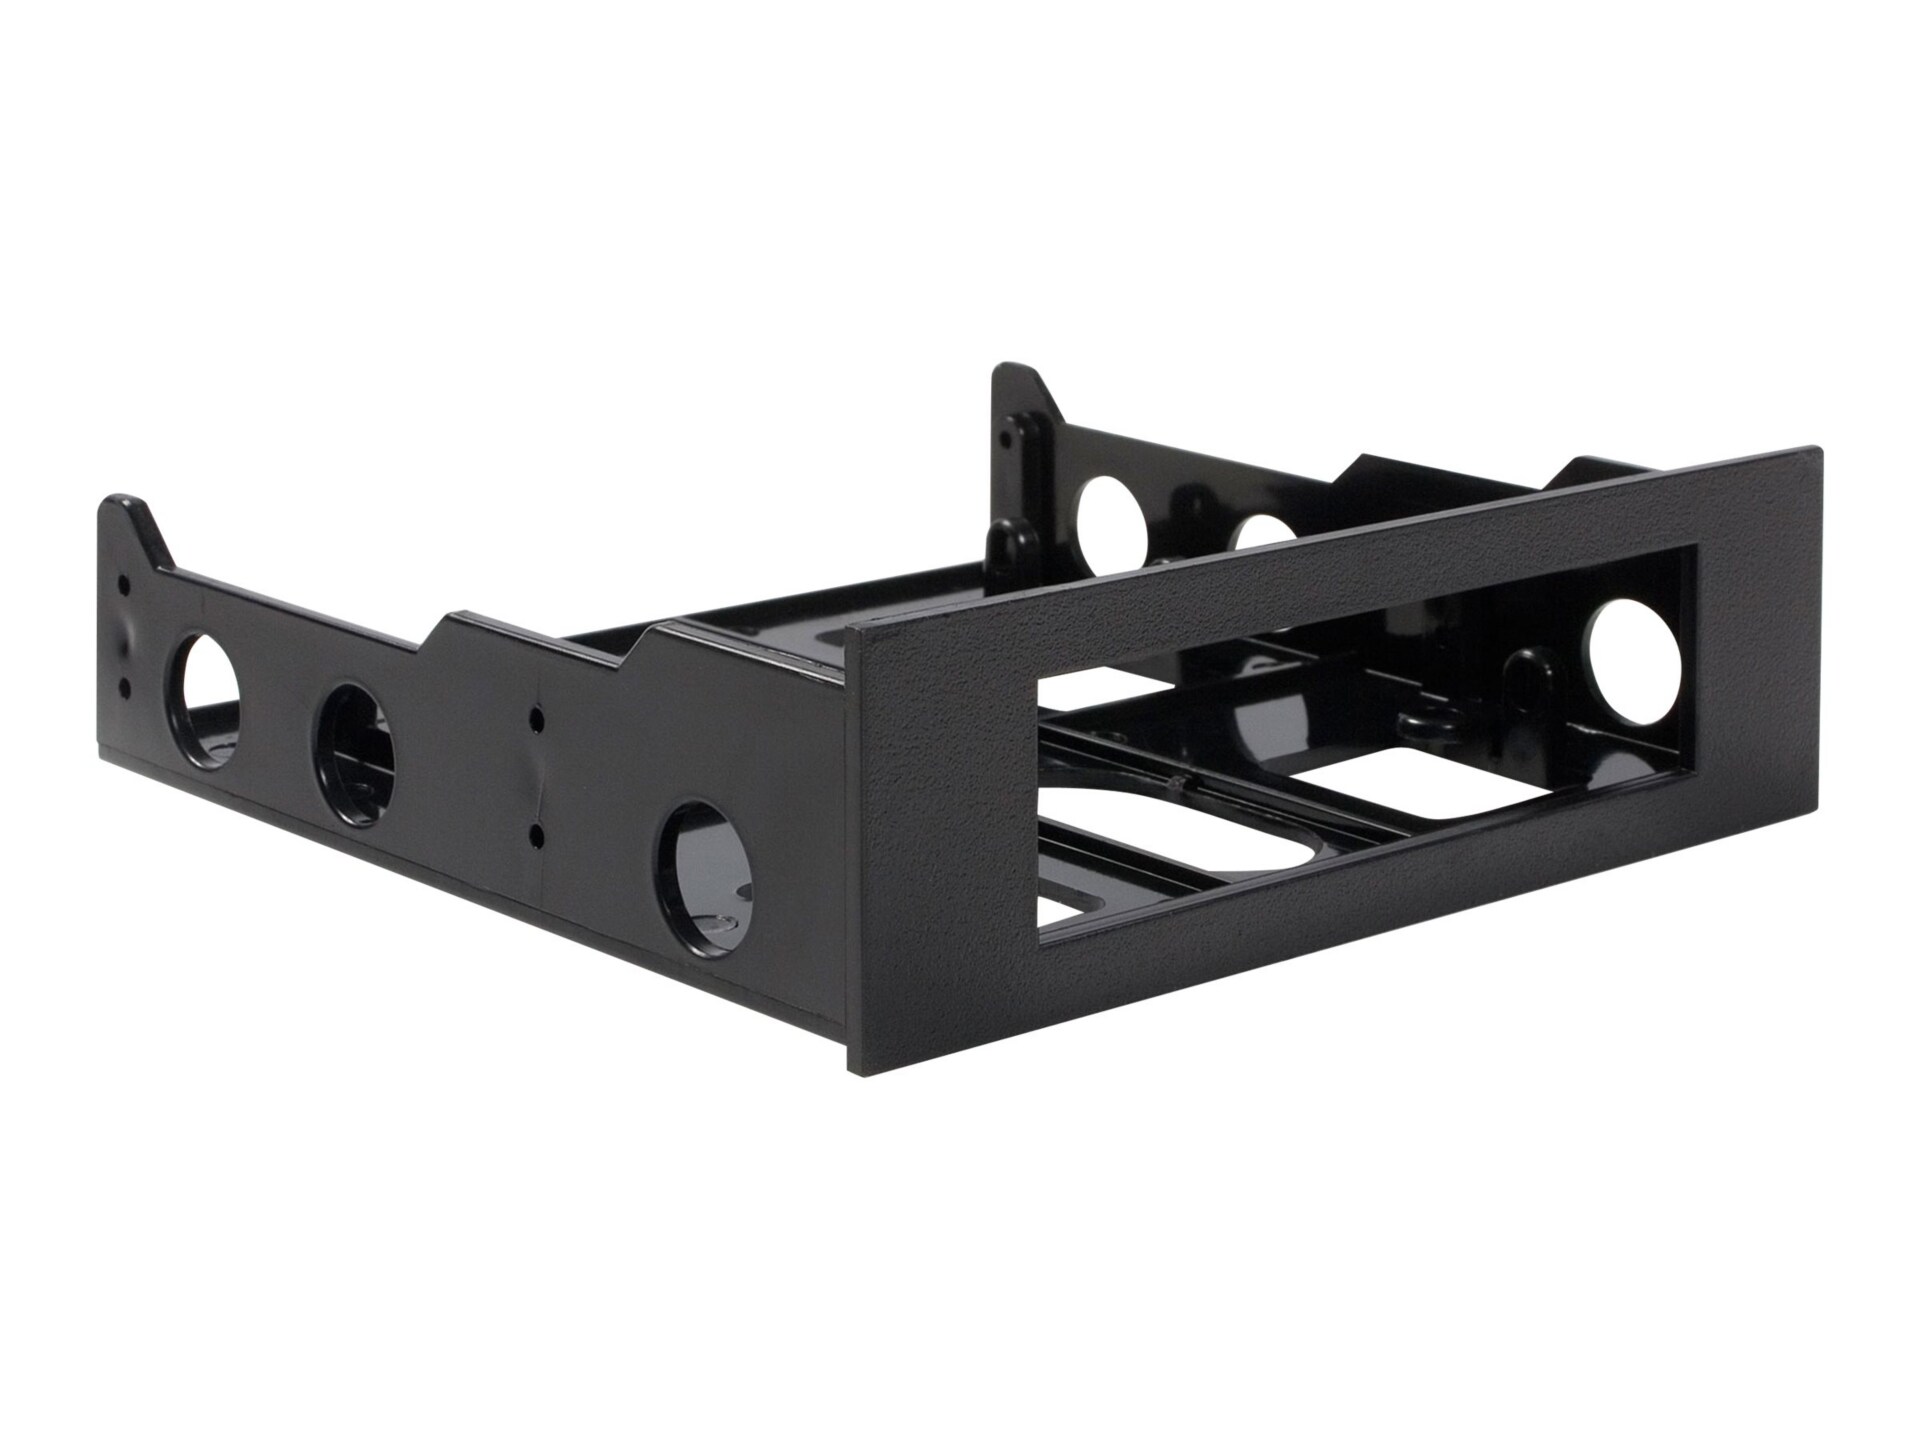 StarTech.com 3,5" to 5,25" Front Bay Mounting Bracket